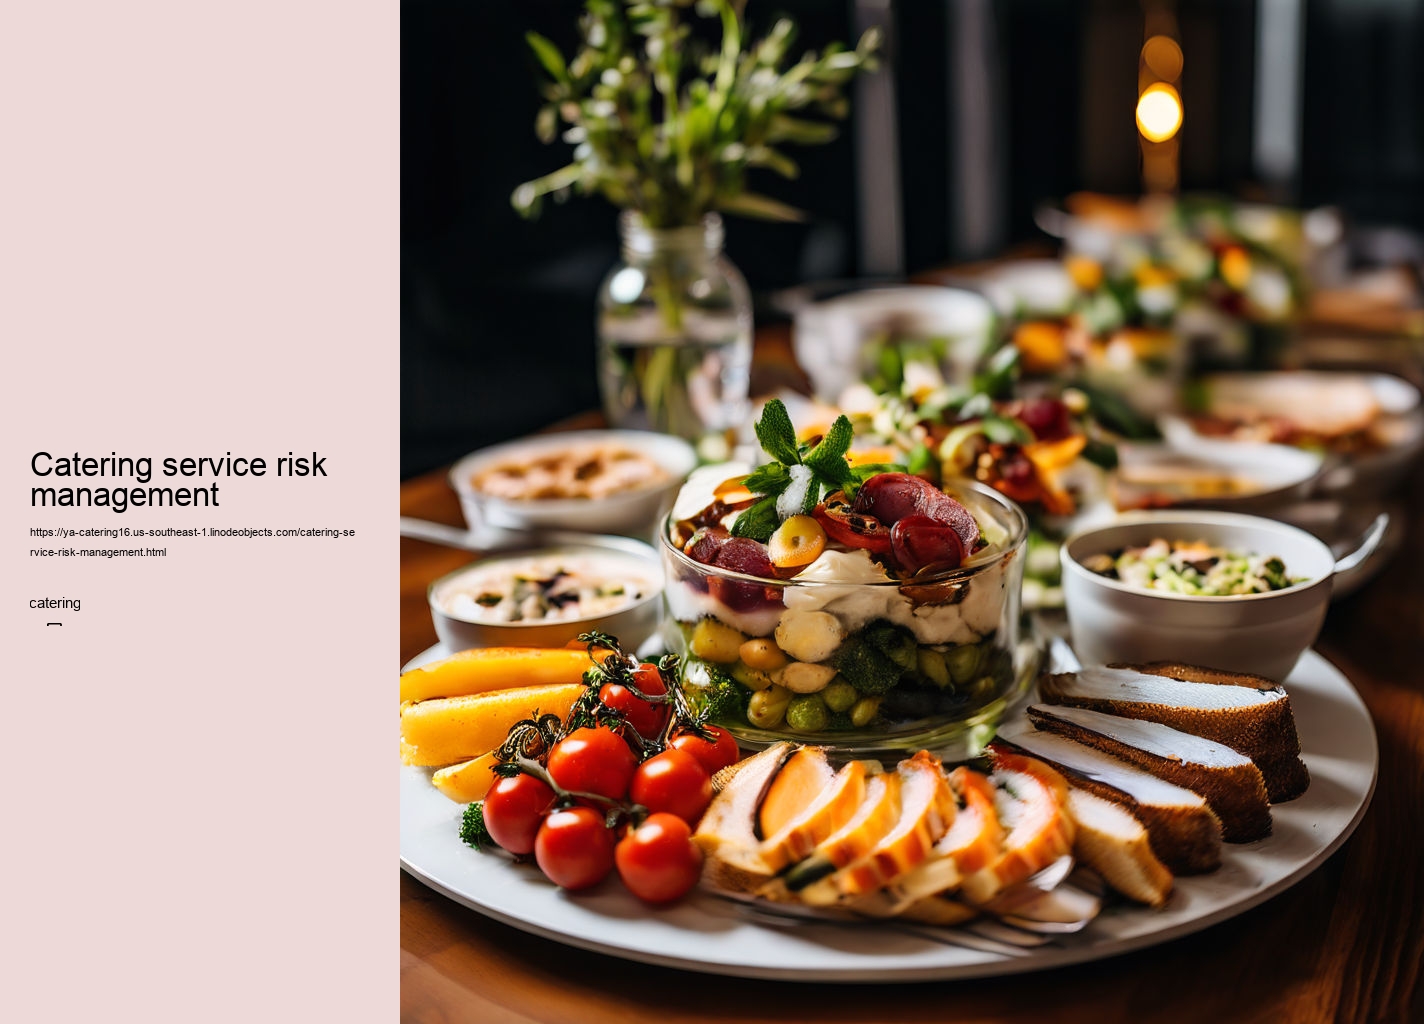 Catering service risk management